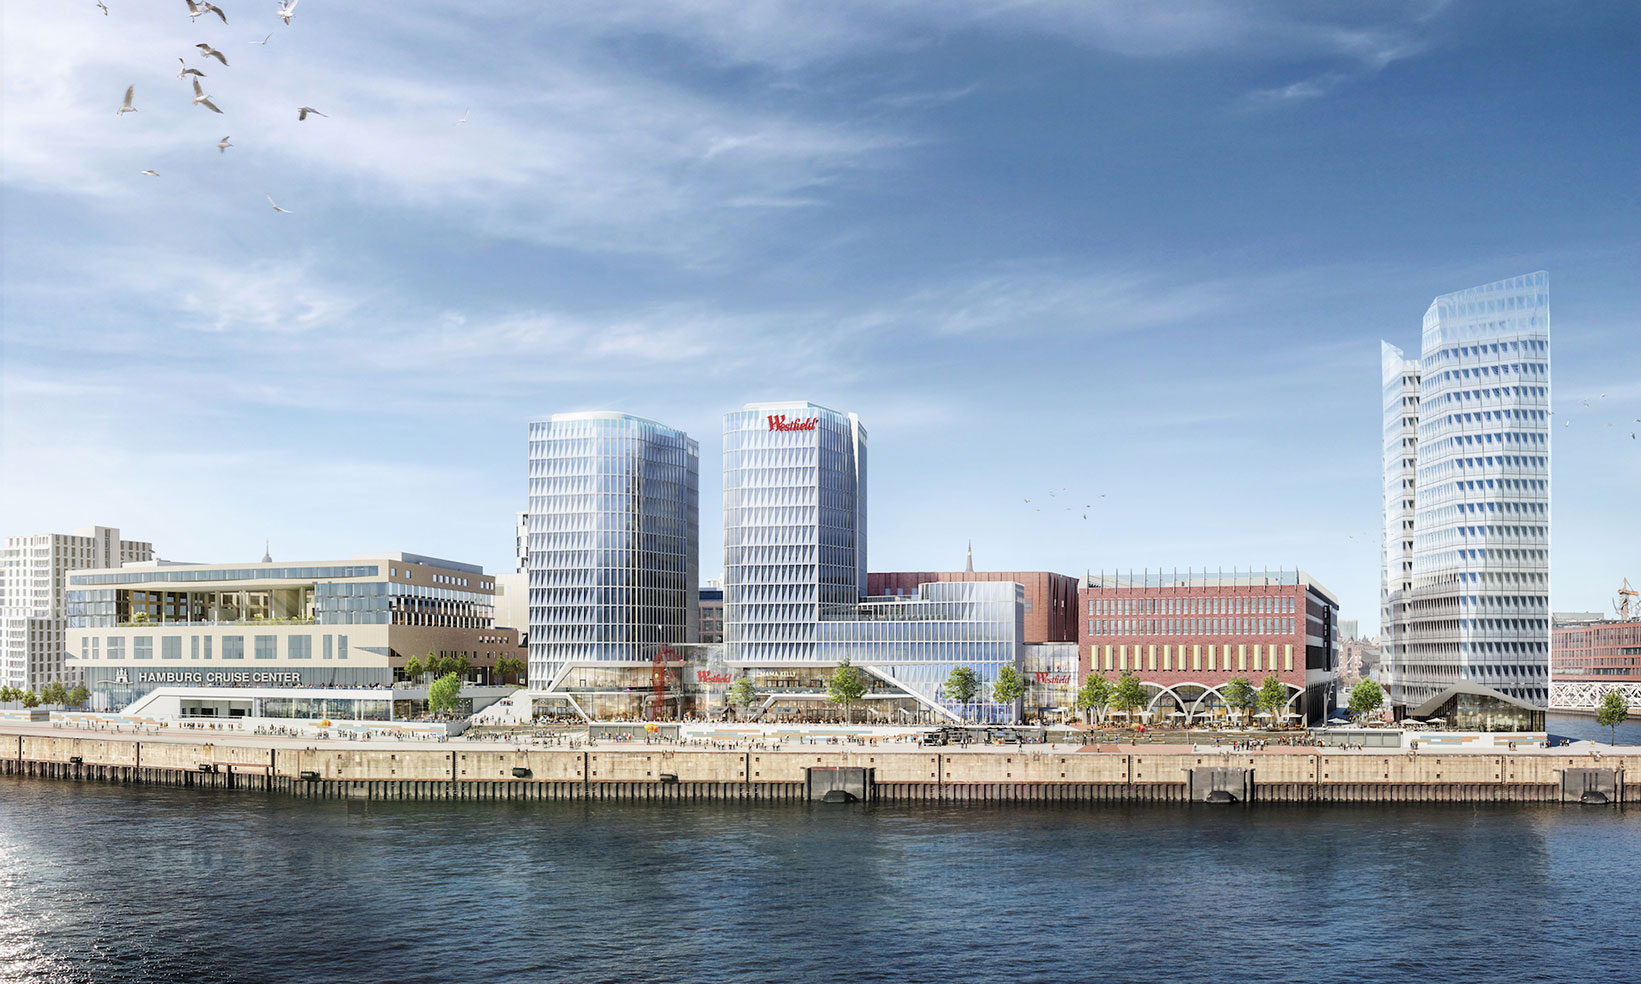 TAKENAKA is part of the new construction project "Westfield Hamburg-Oversea Quarter"